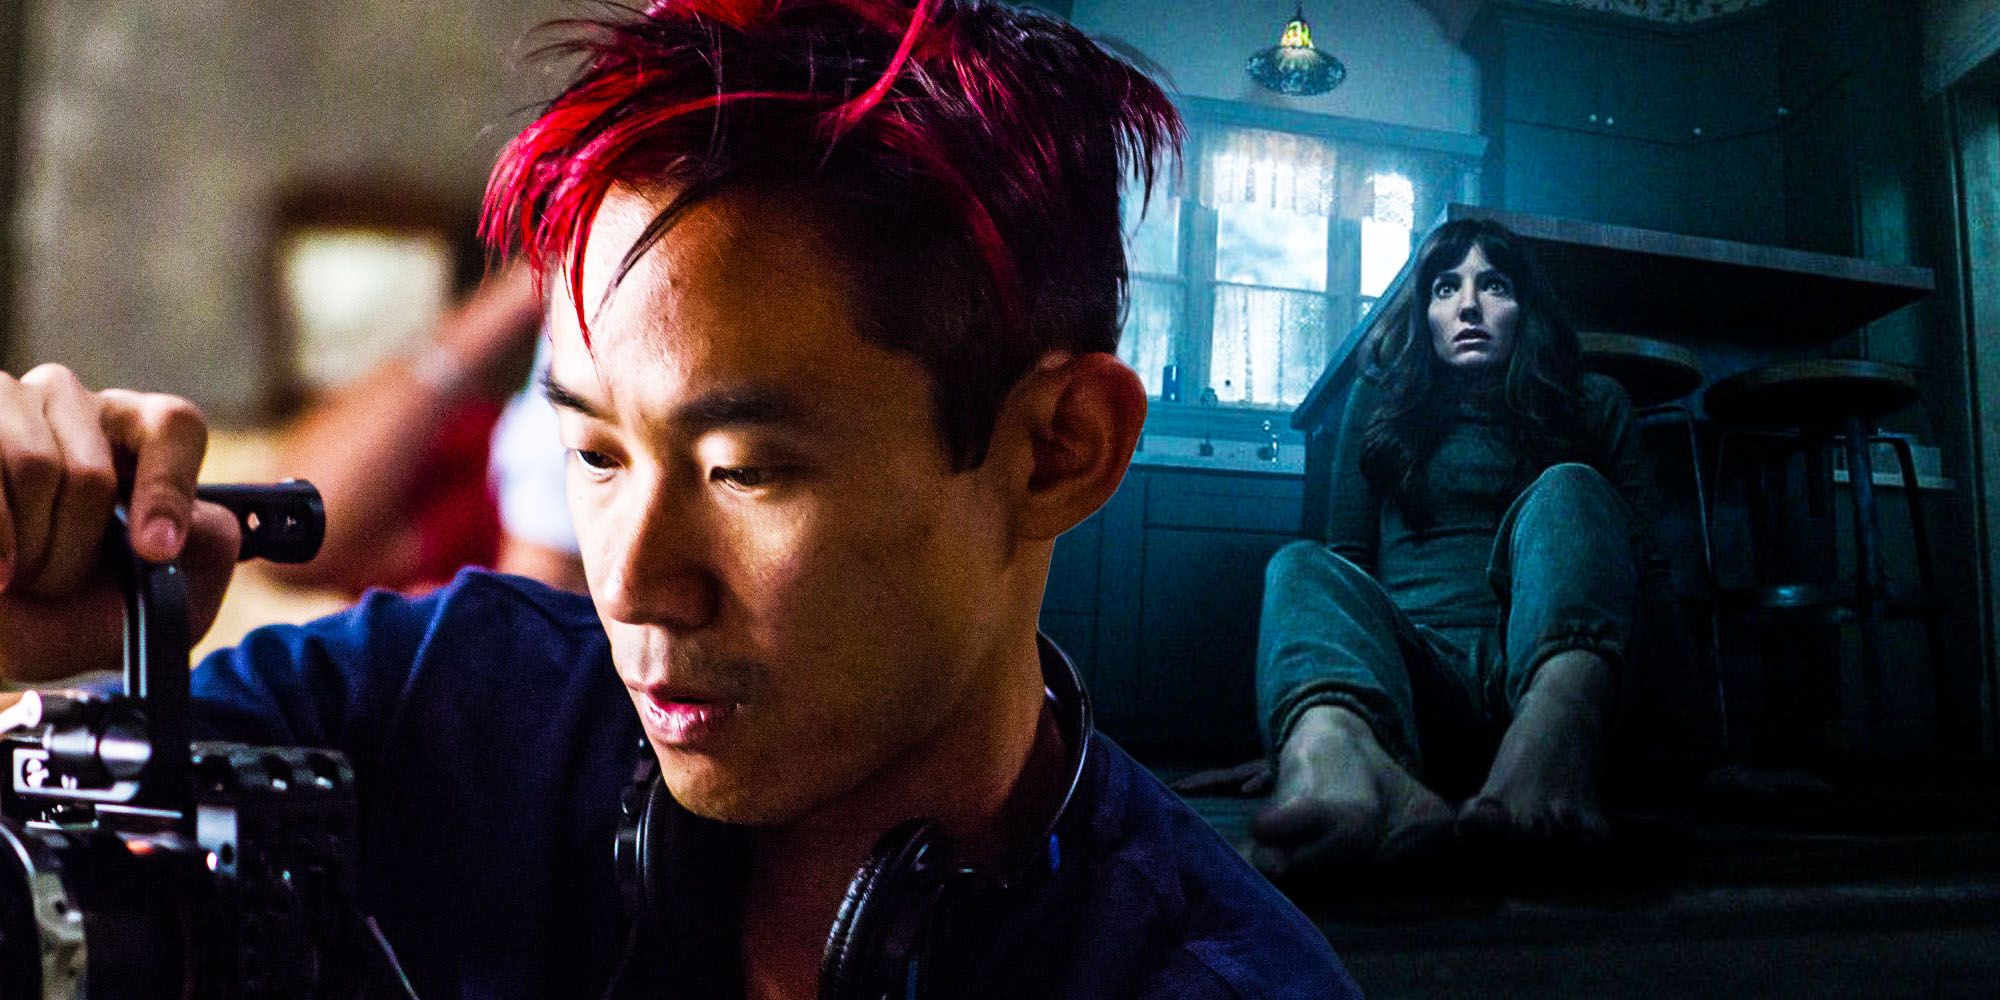 Malignant Could Become A Horror Movie Franchise, Says James Wan